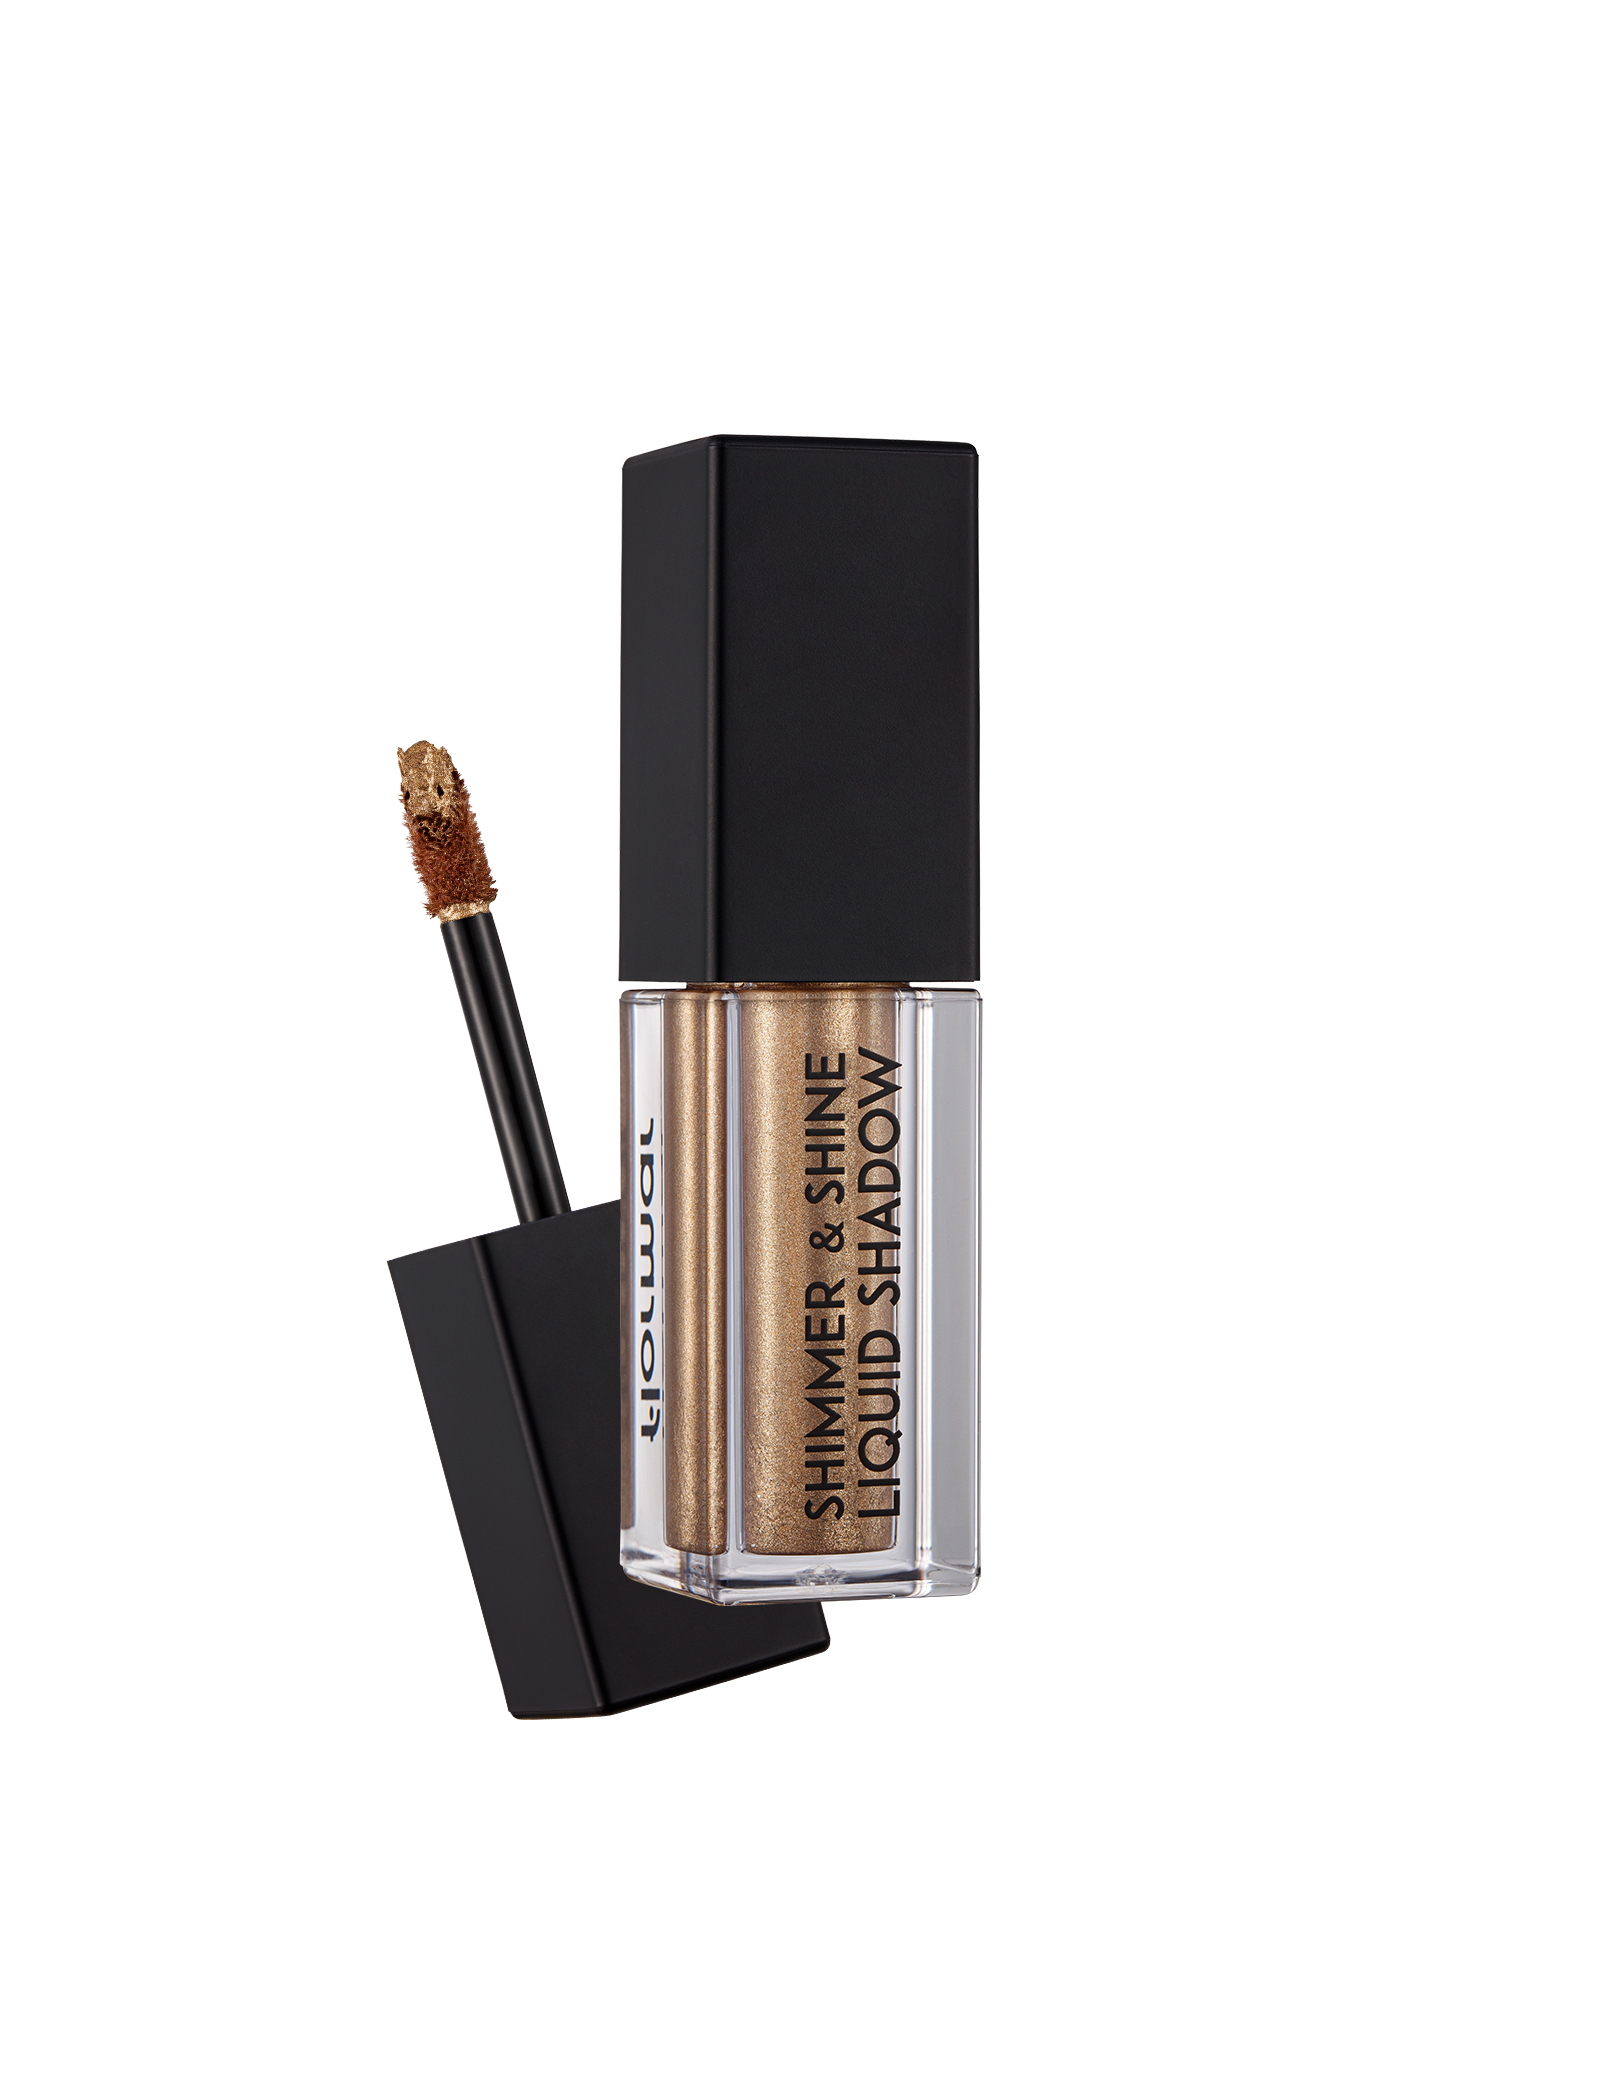 Shimmer & Shine Liquid Eyeshadow - 03 Ambitious Gold by Flormar